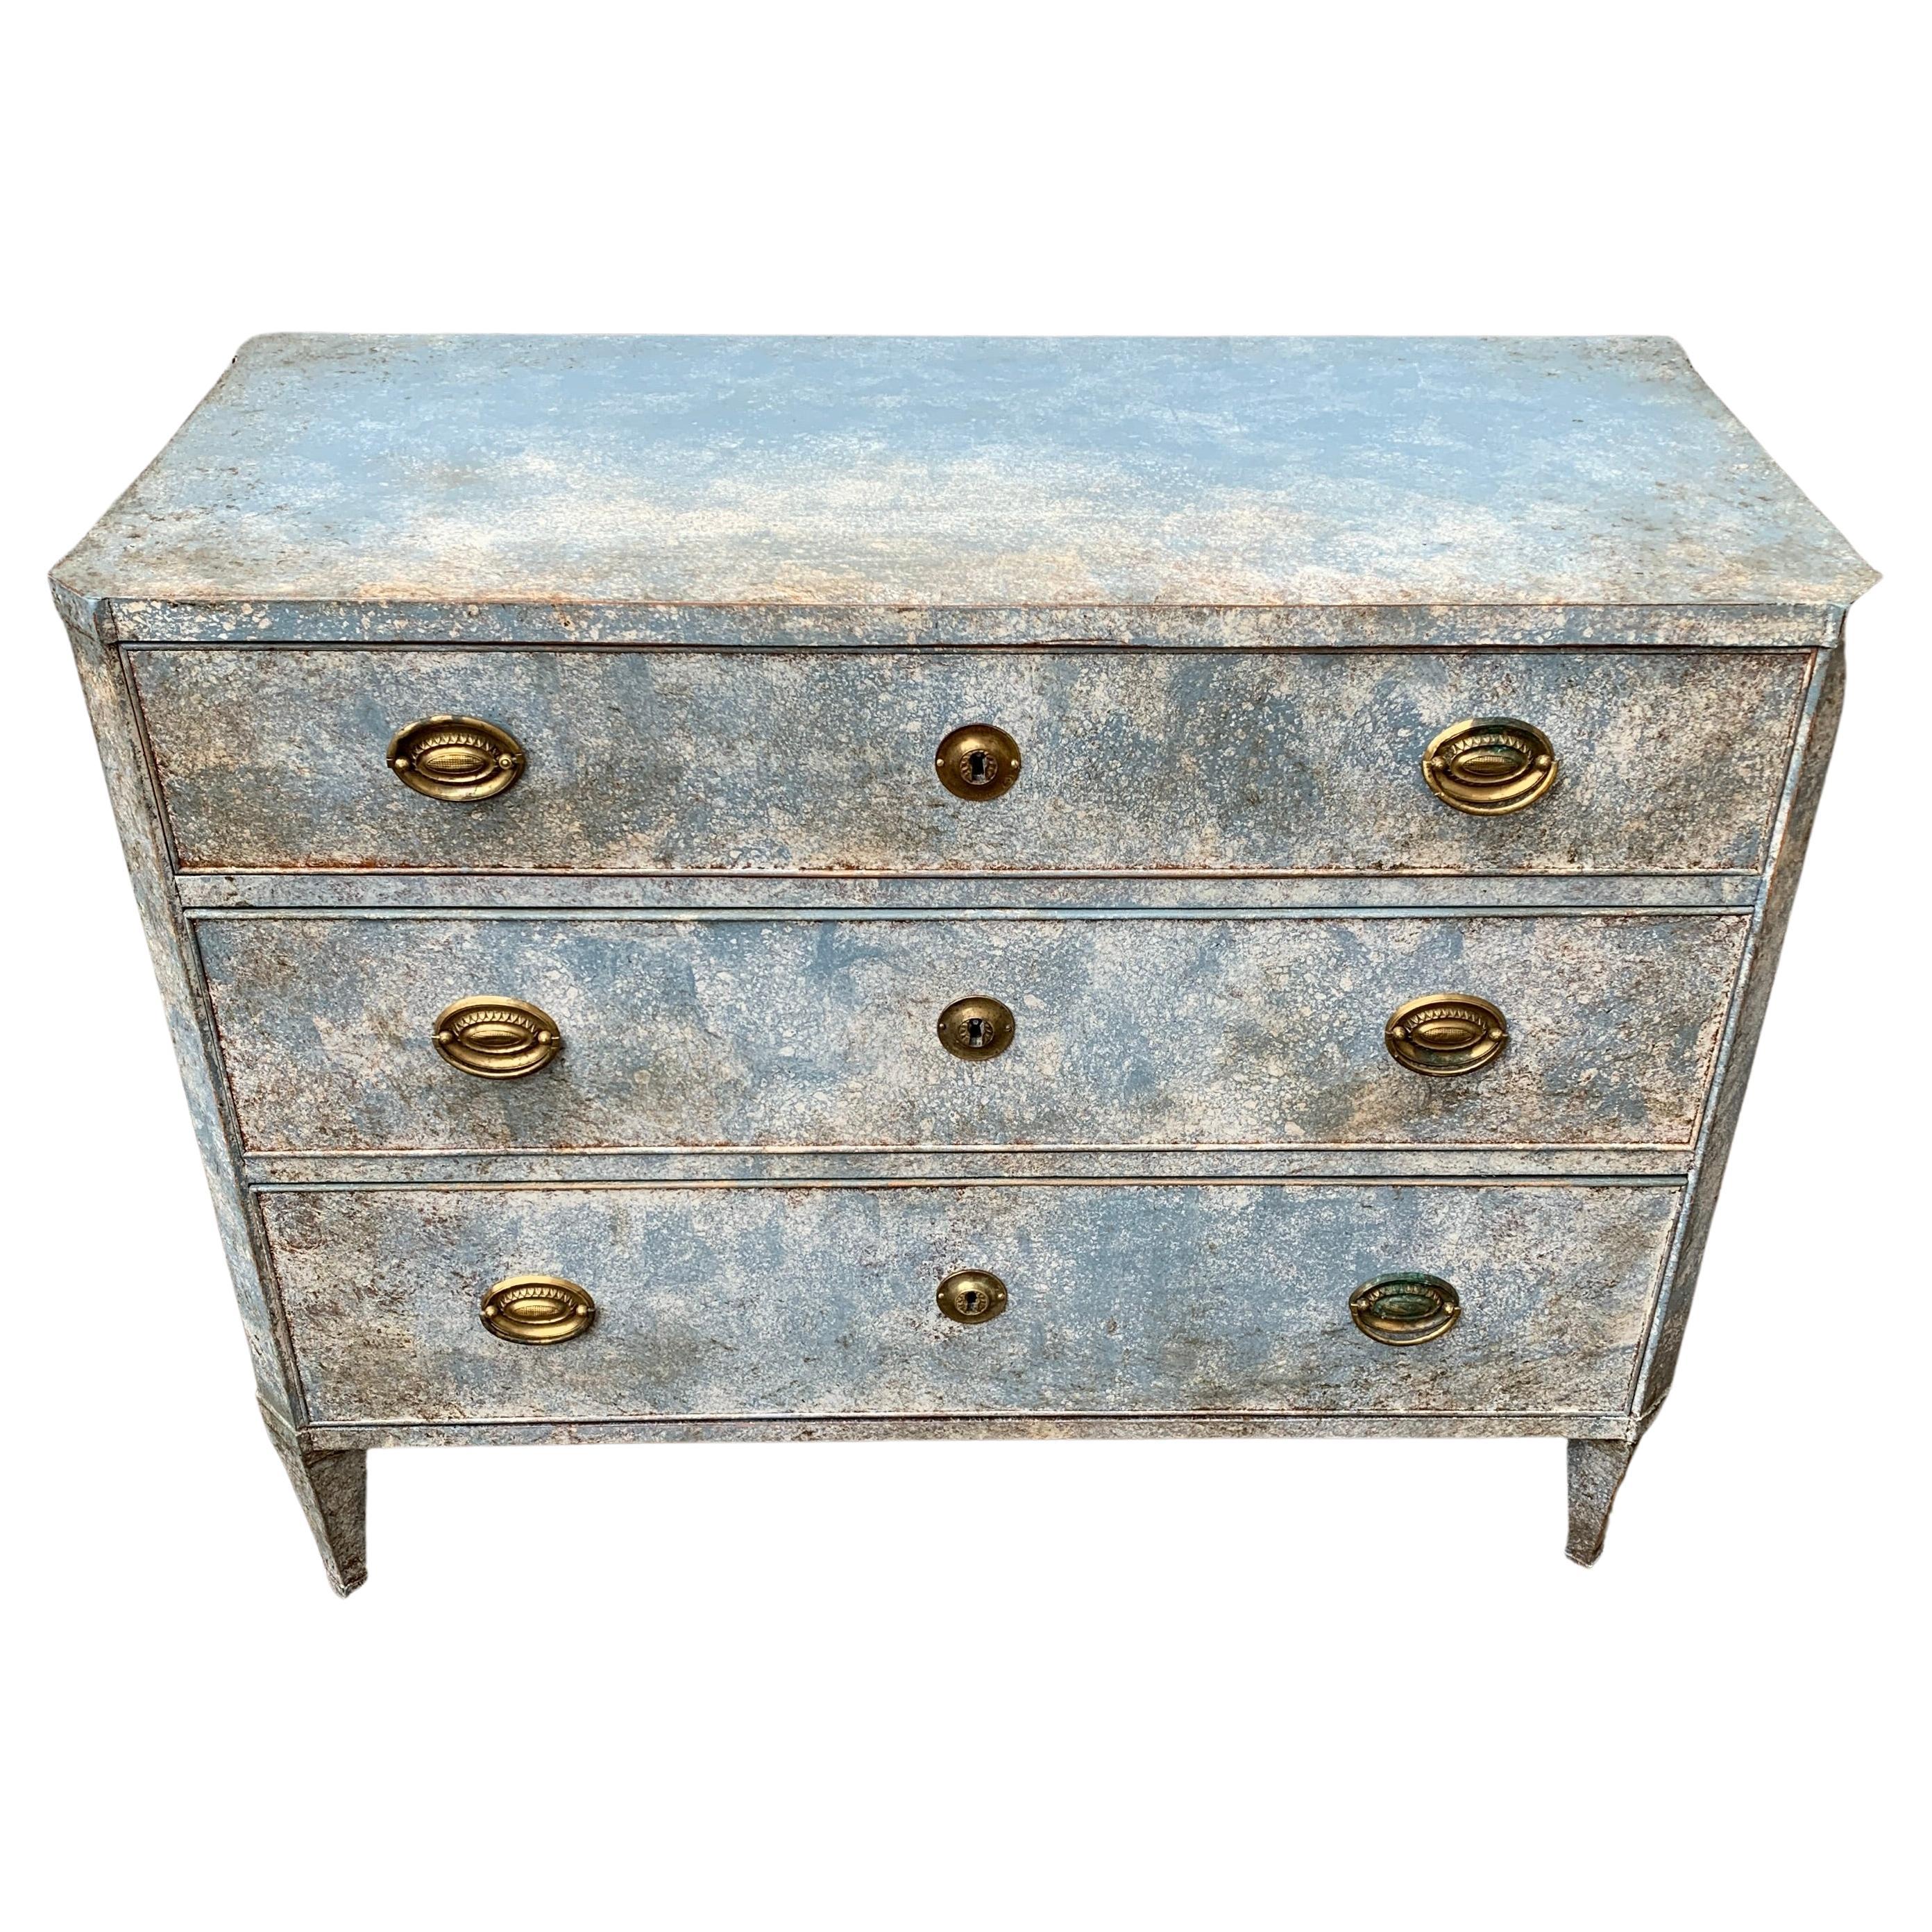 Period Gustavian Chest of 3 Drawers with Original Blue Paint